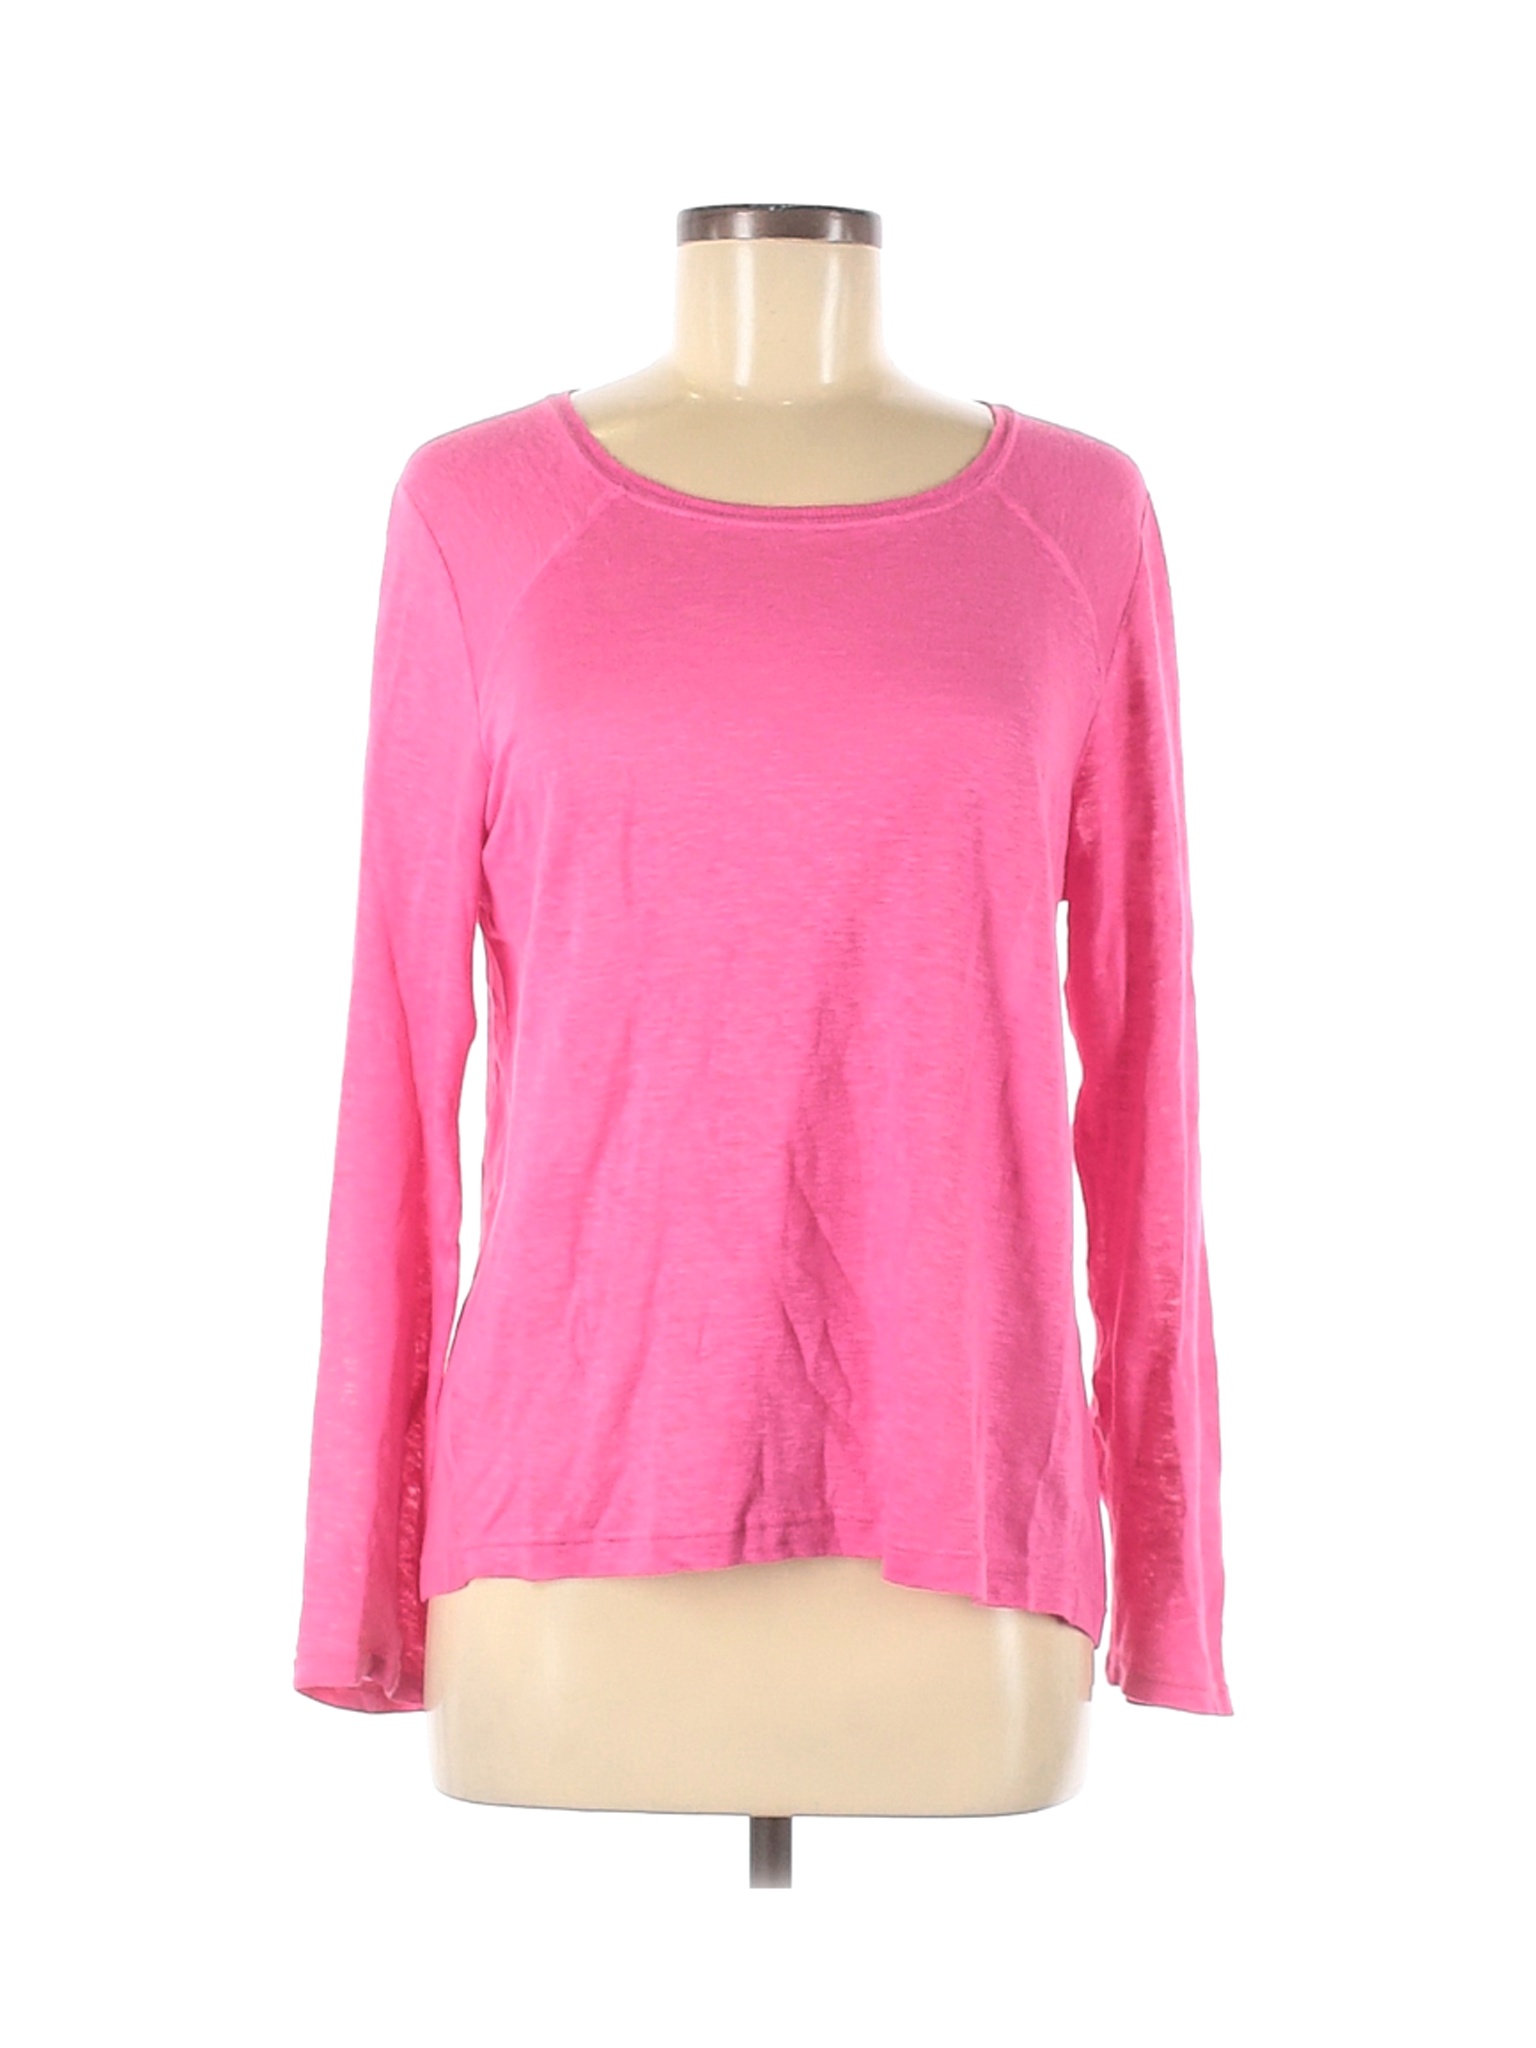 Marc by Marc Jacobs Women Pink Pullover Sweater M | eBay